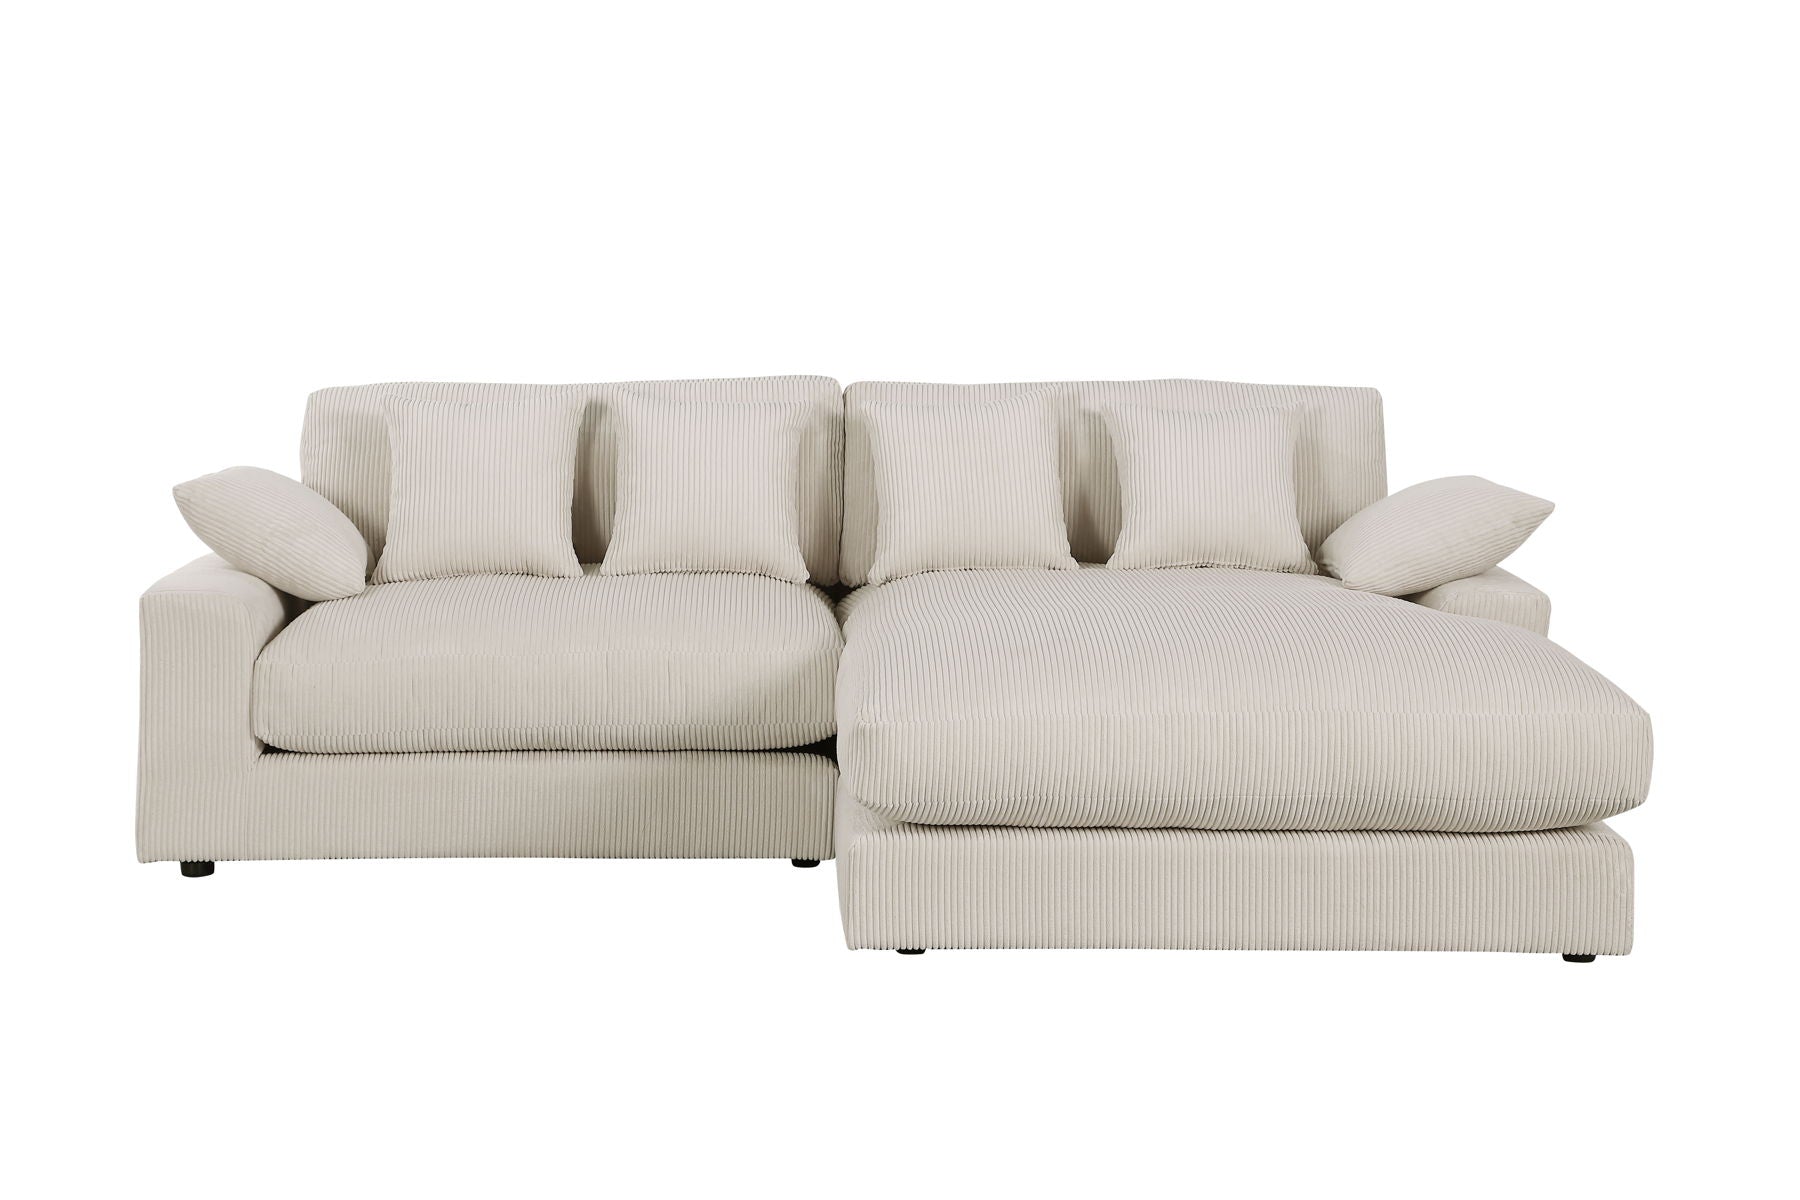 Mystic - Corduroy Reversible Sectional Sofa Chaise